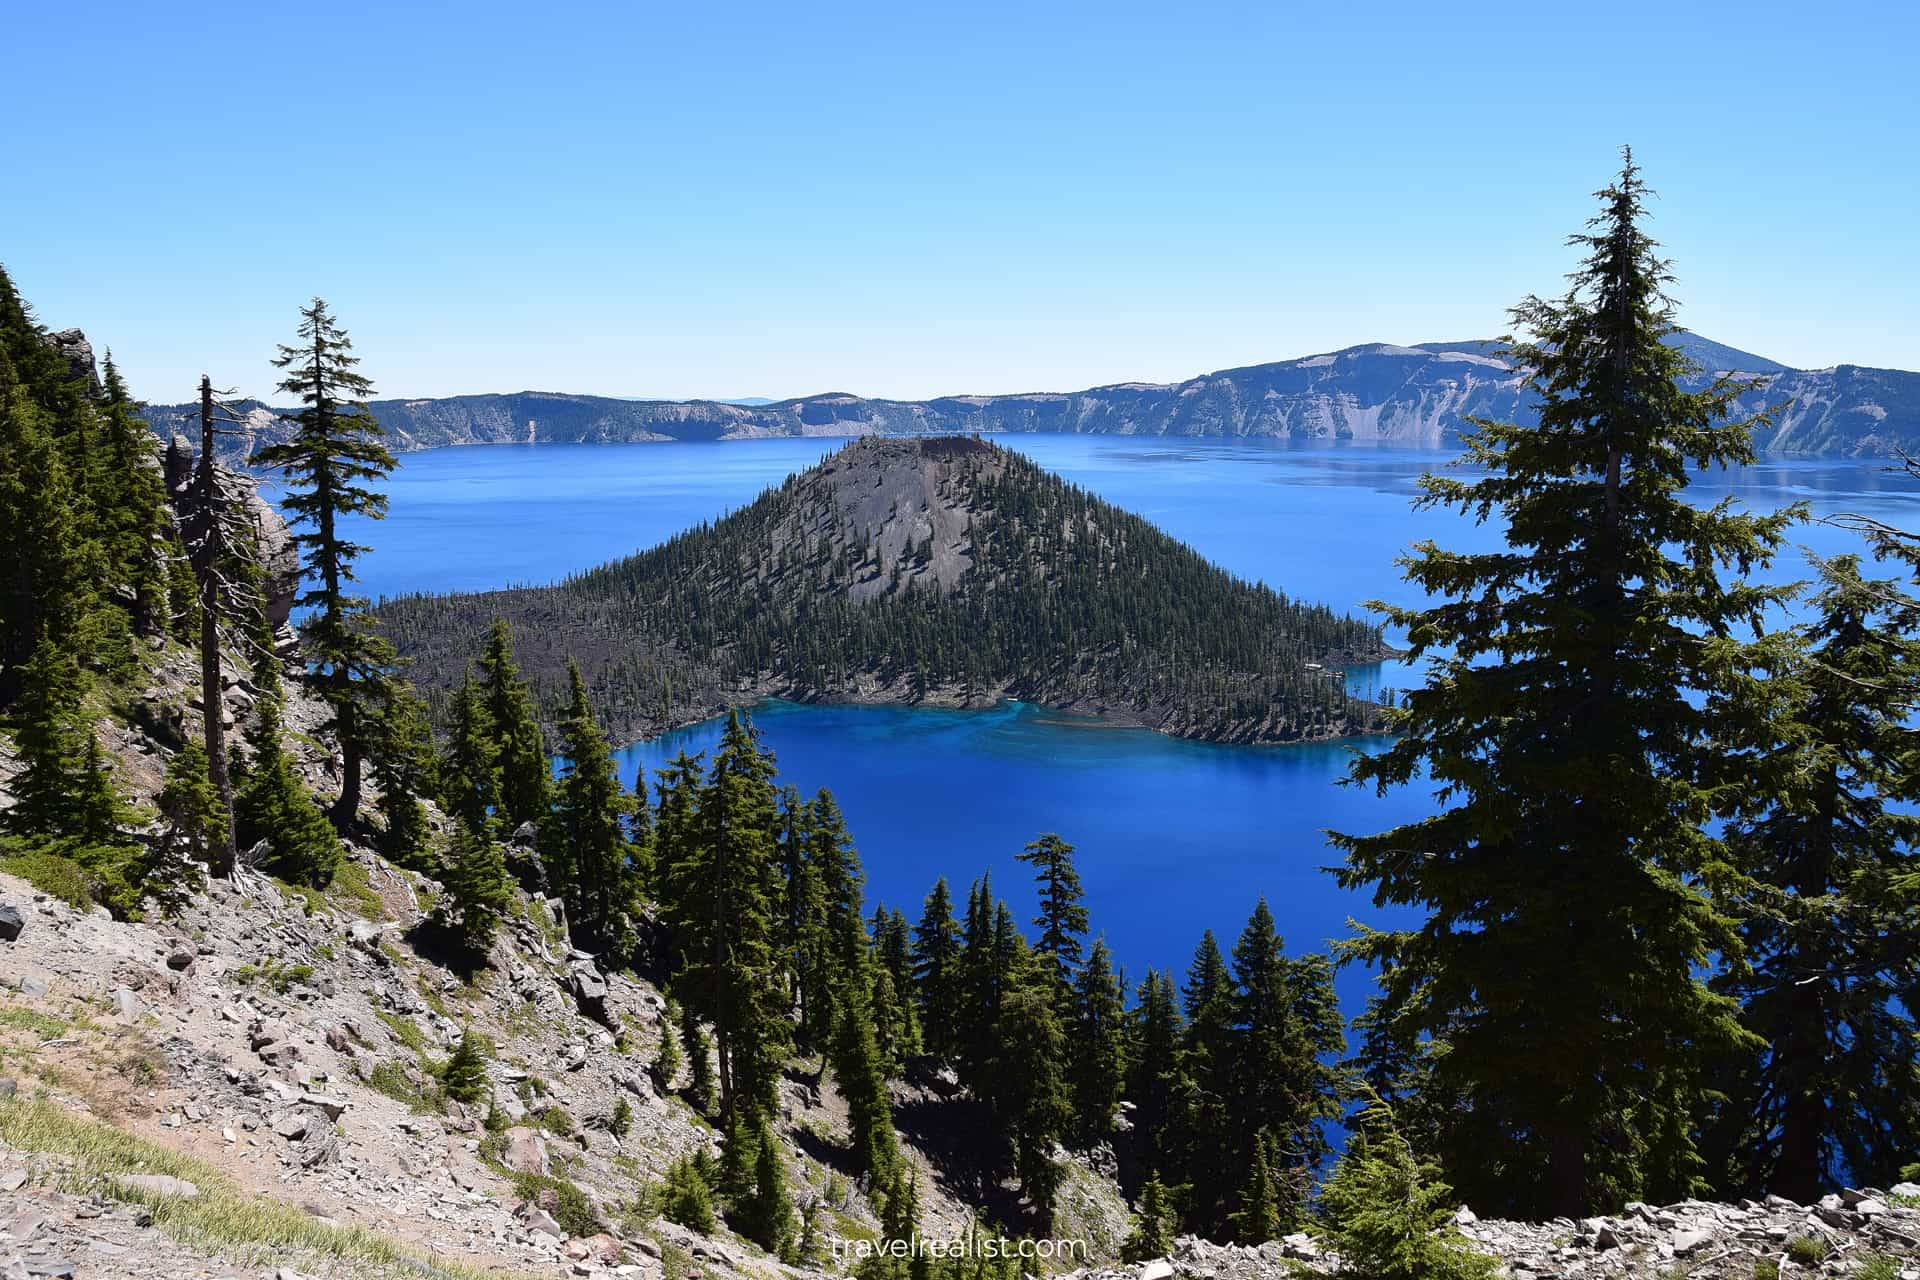 Wizard island volcano in Crater Lake National Park, Oregon, US, main stop on Northern California and Oregon Itinerary